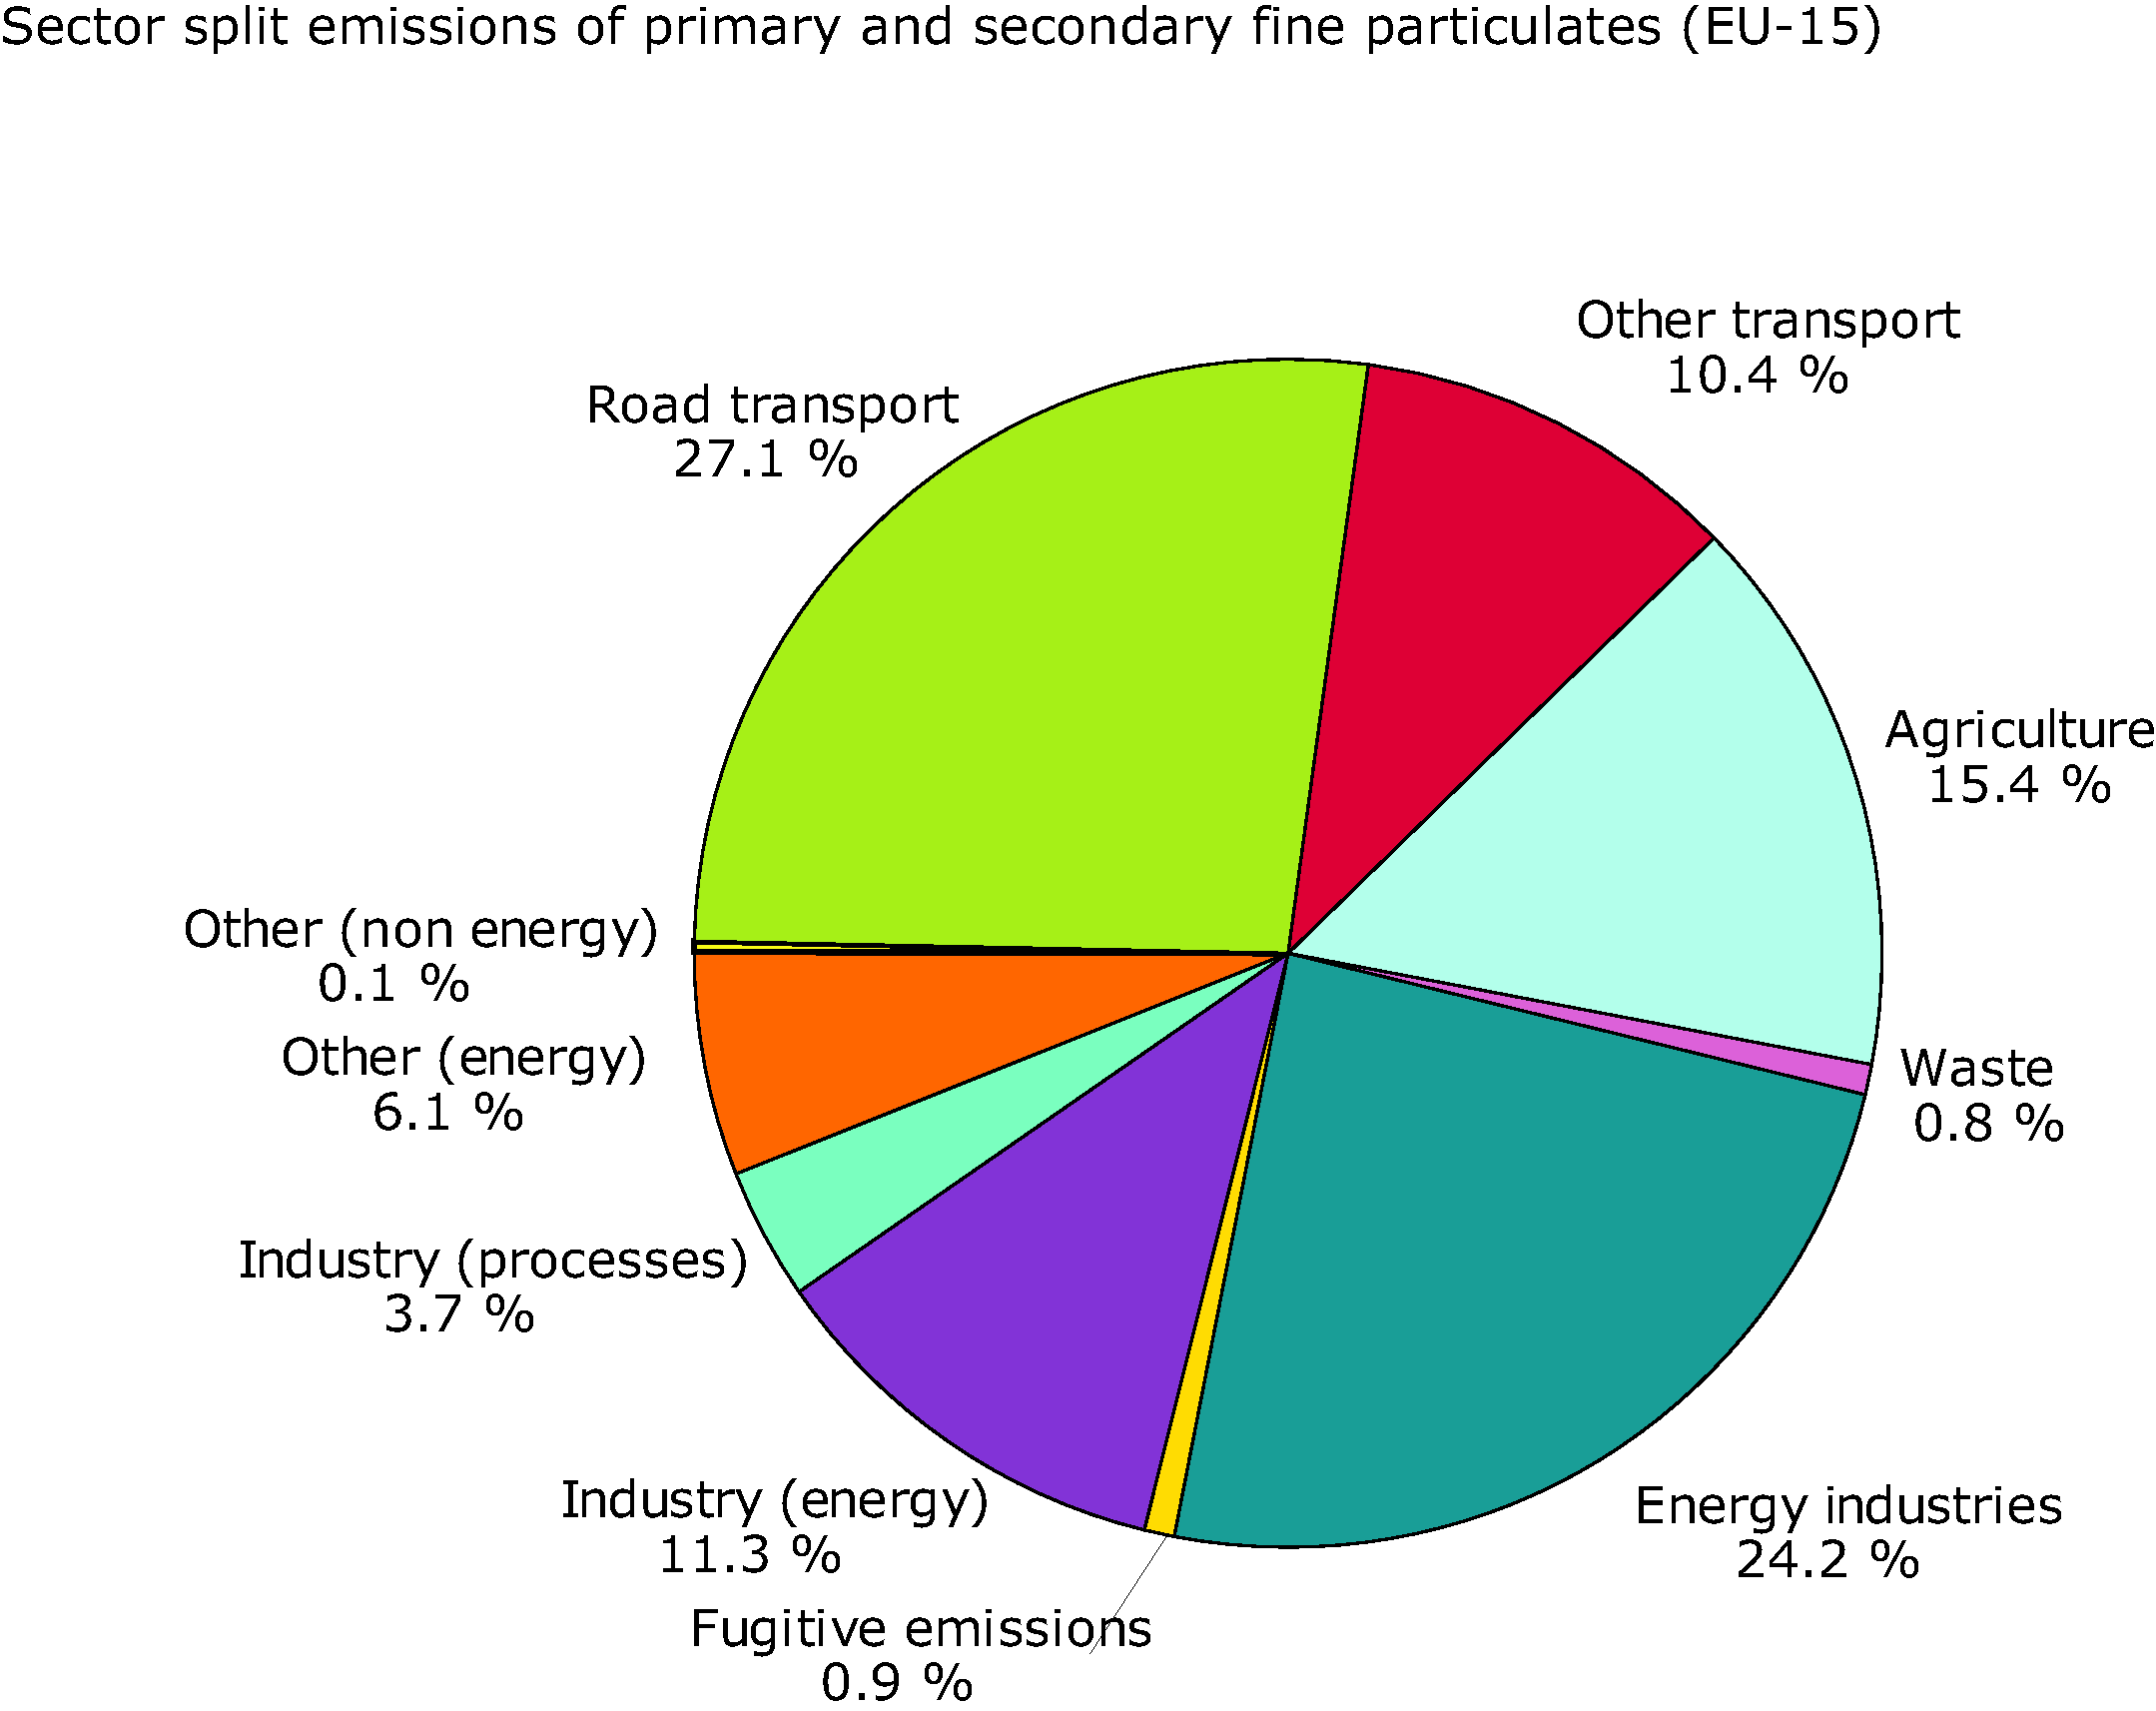 Sector split for primary and secondary fine particulate emissions (EU-15), 2002